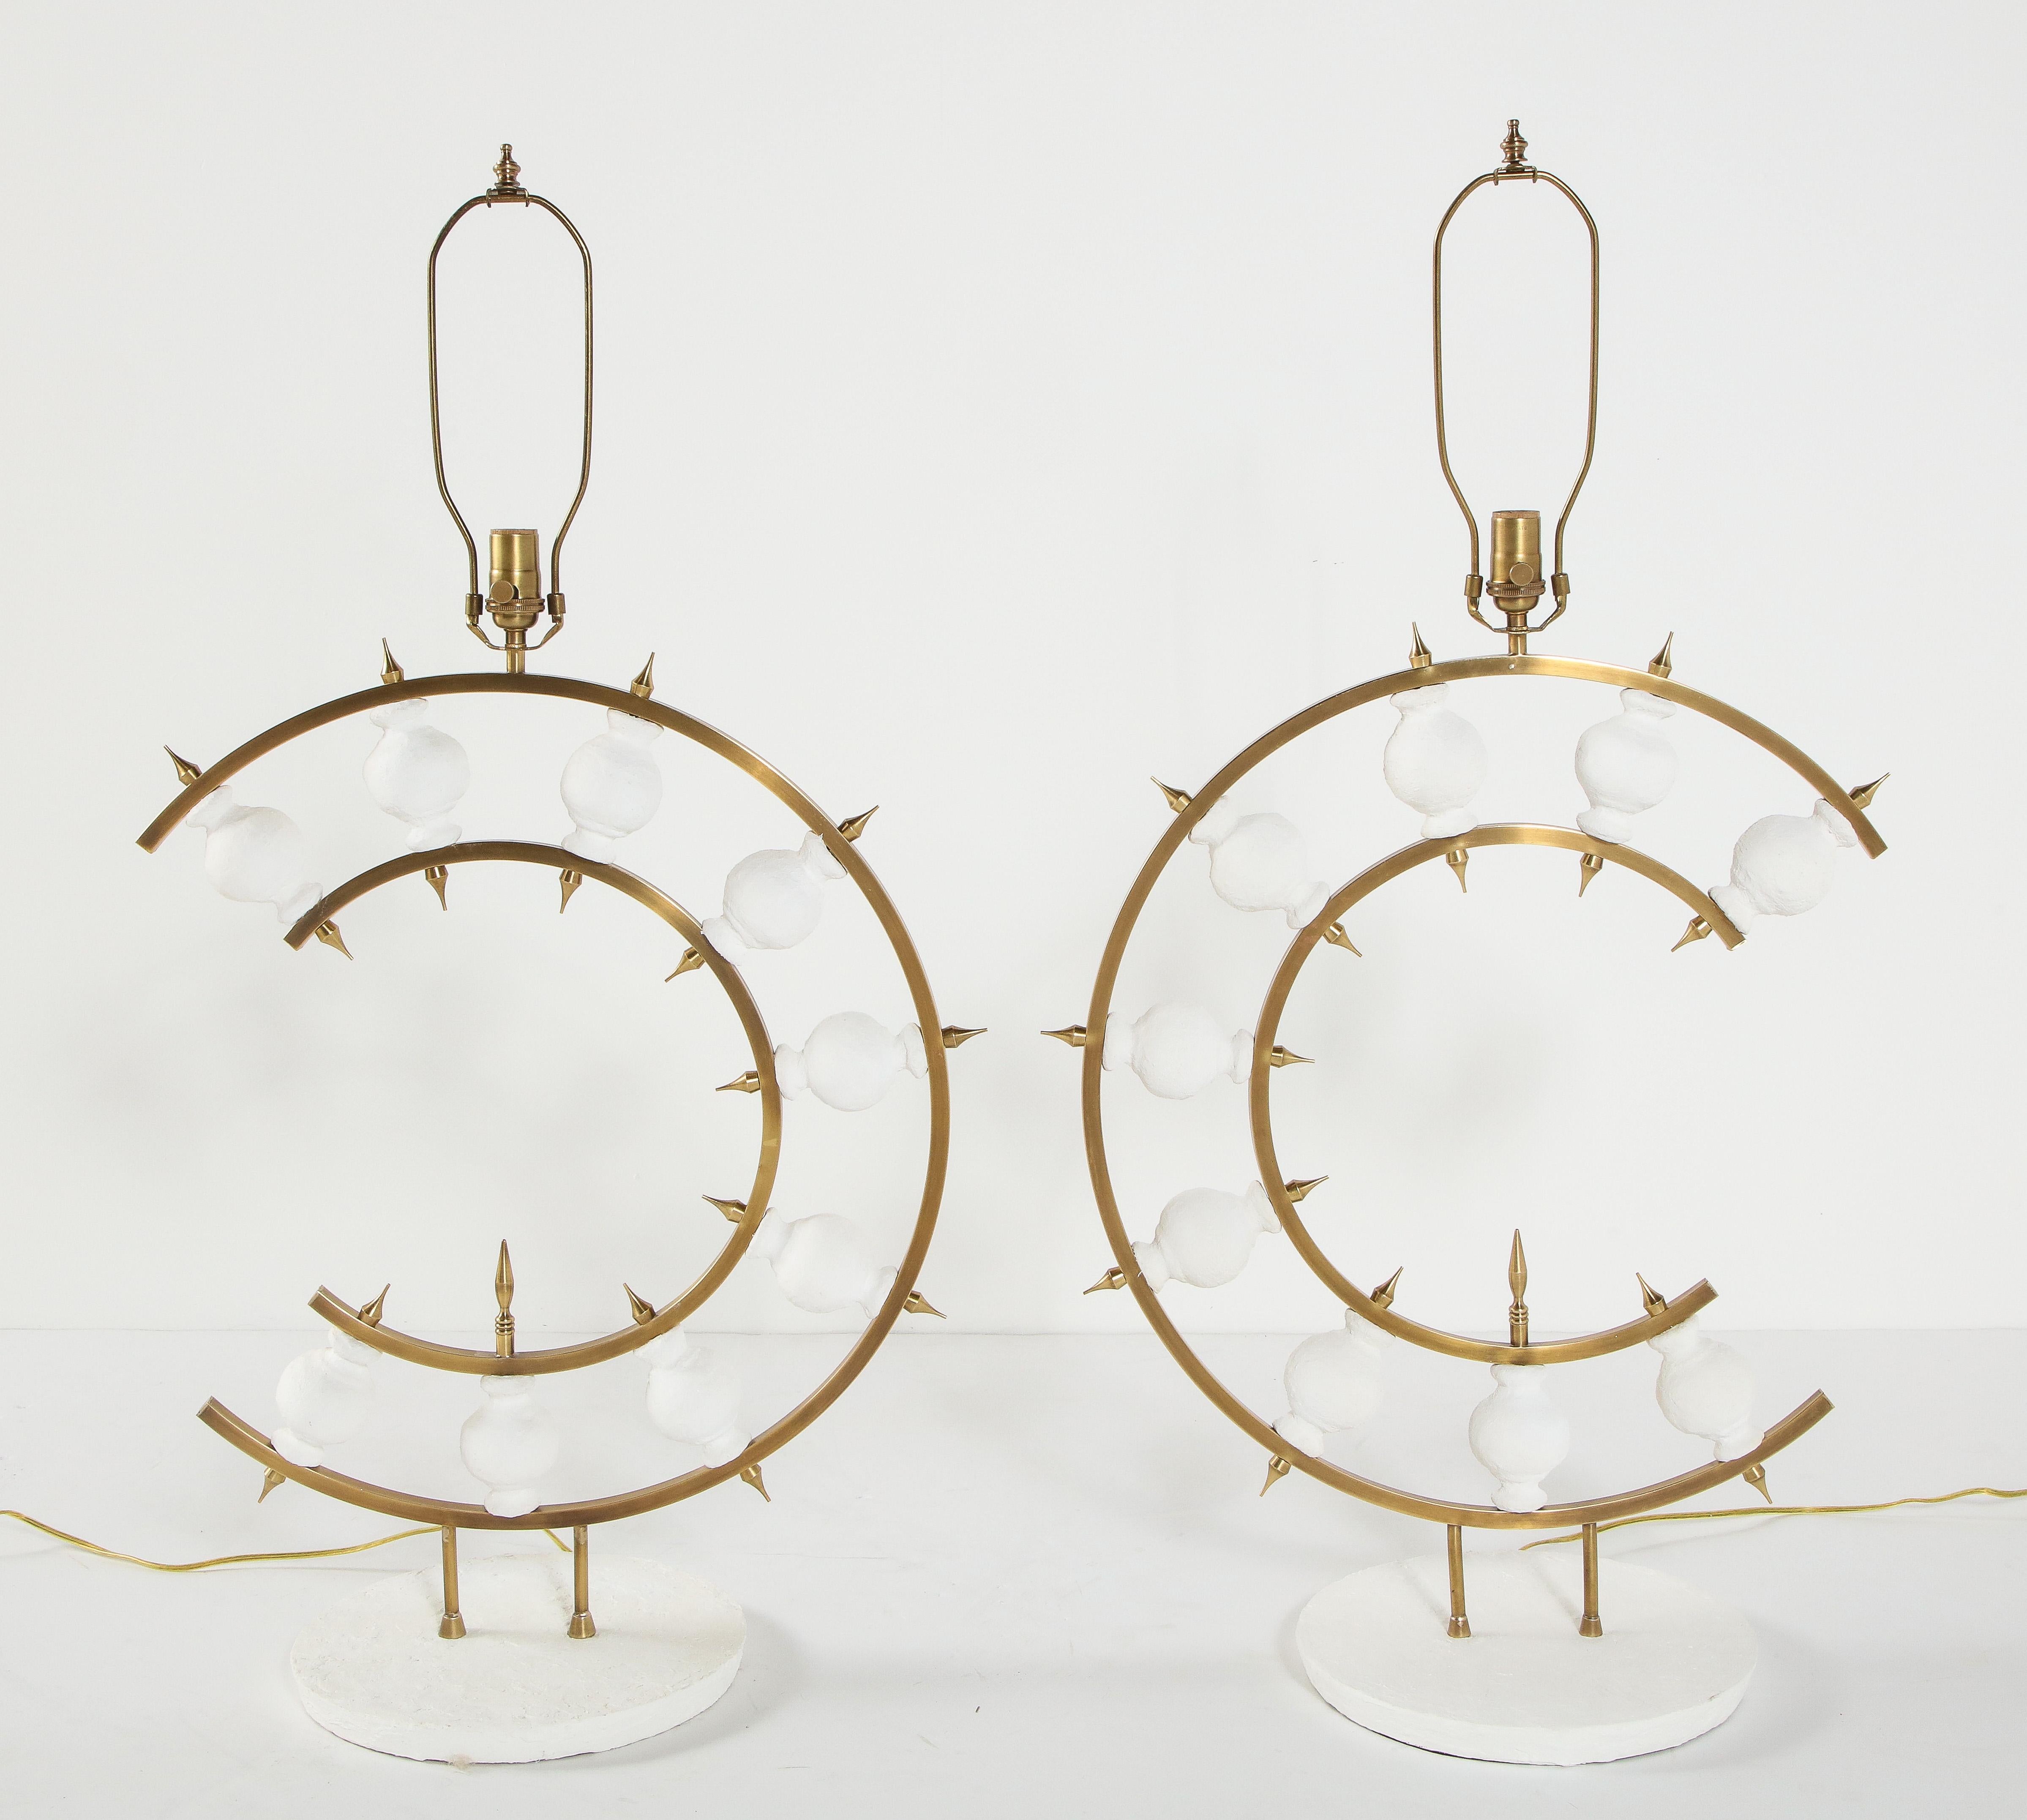 Pair of Lamps, Plaster and Brass, Organic Shape, Contemporary Tall Lamps Design For Sale 5